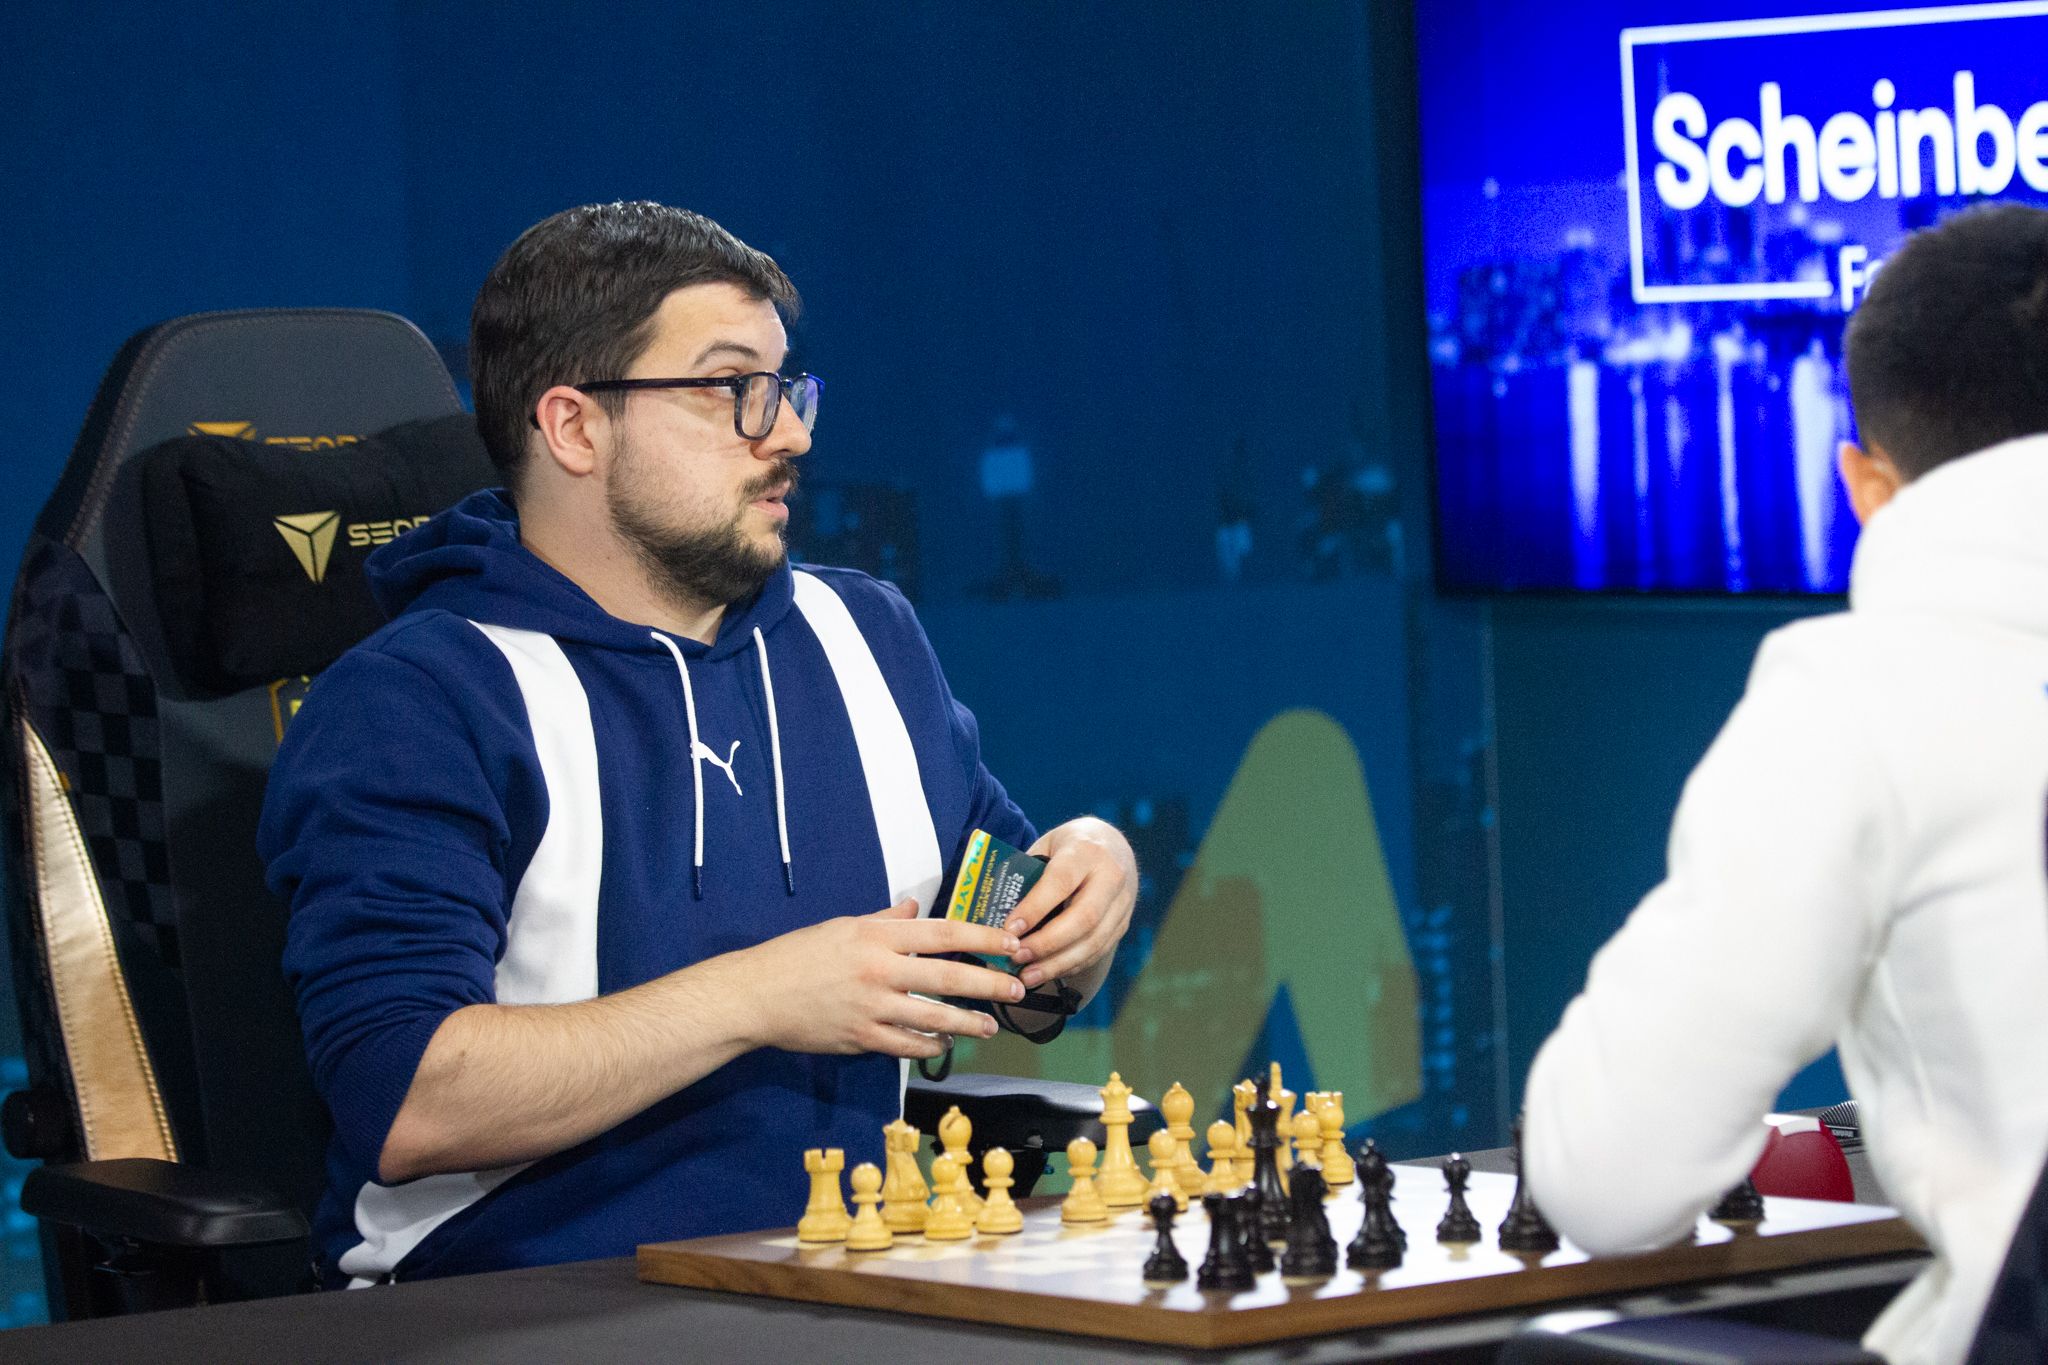 GRAND FINAL: Nakamura vs. Caruana, Chessable Masters 2023, Which American  Champion Will Claim the Second Event of the CCT?